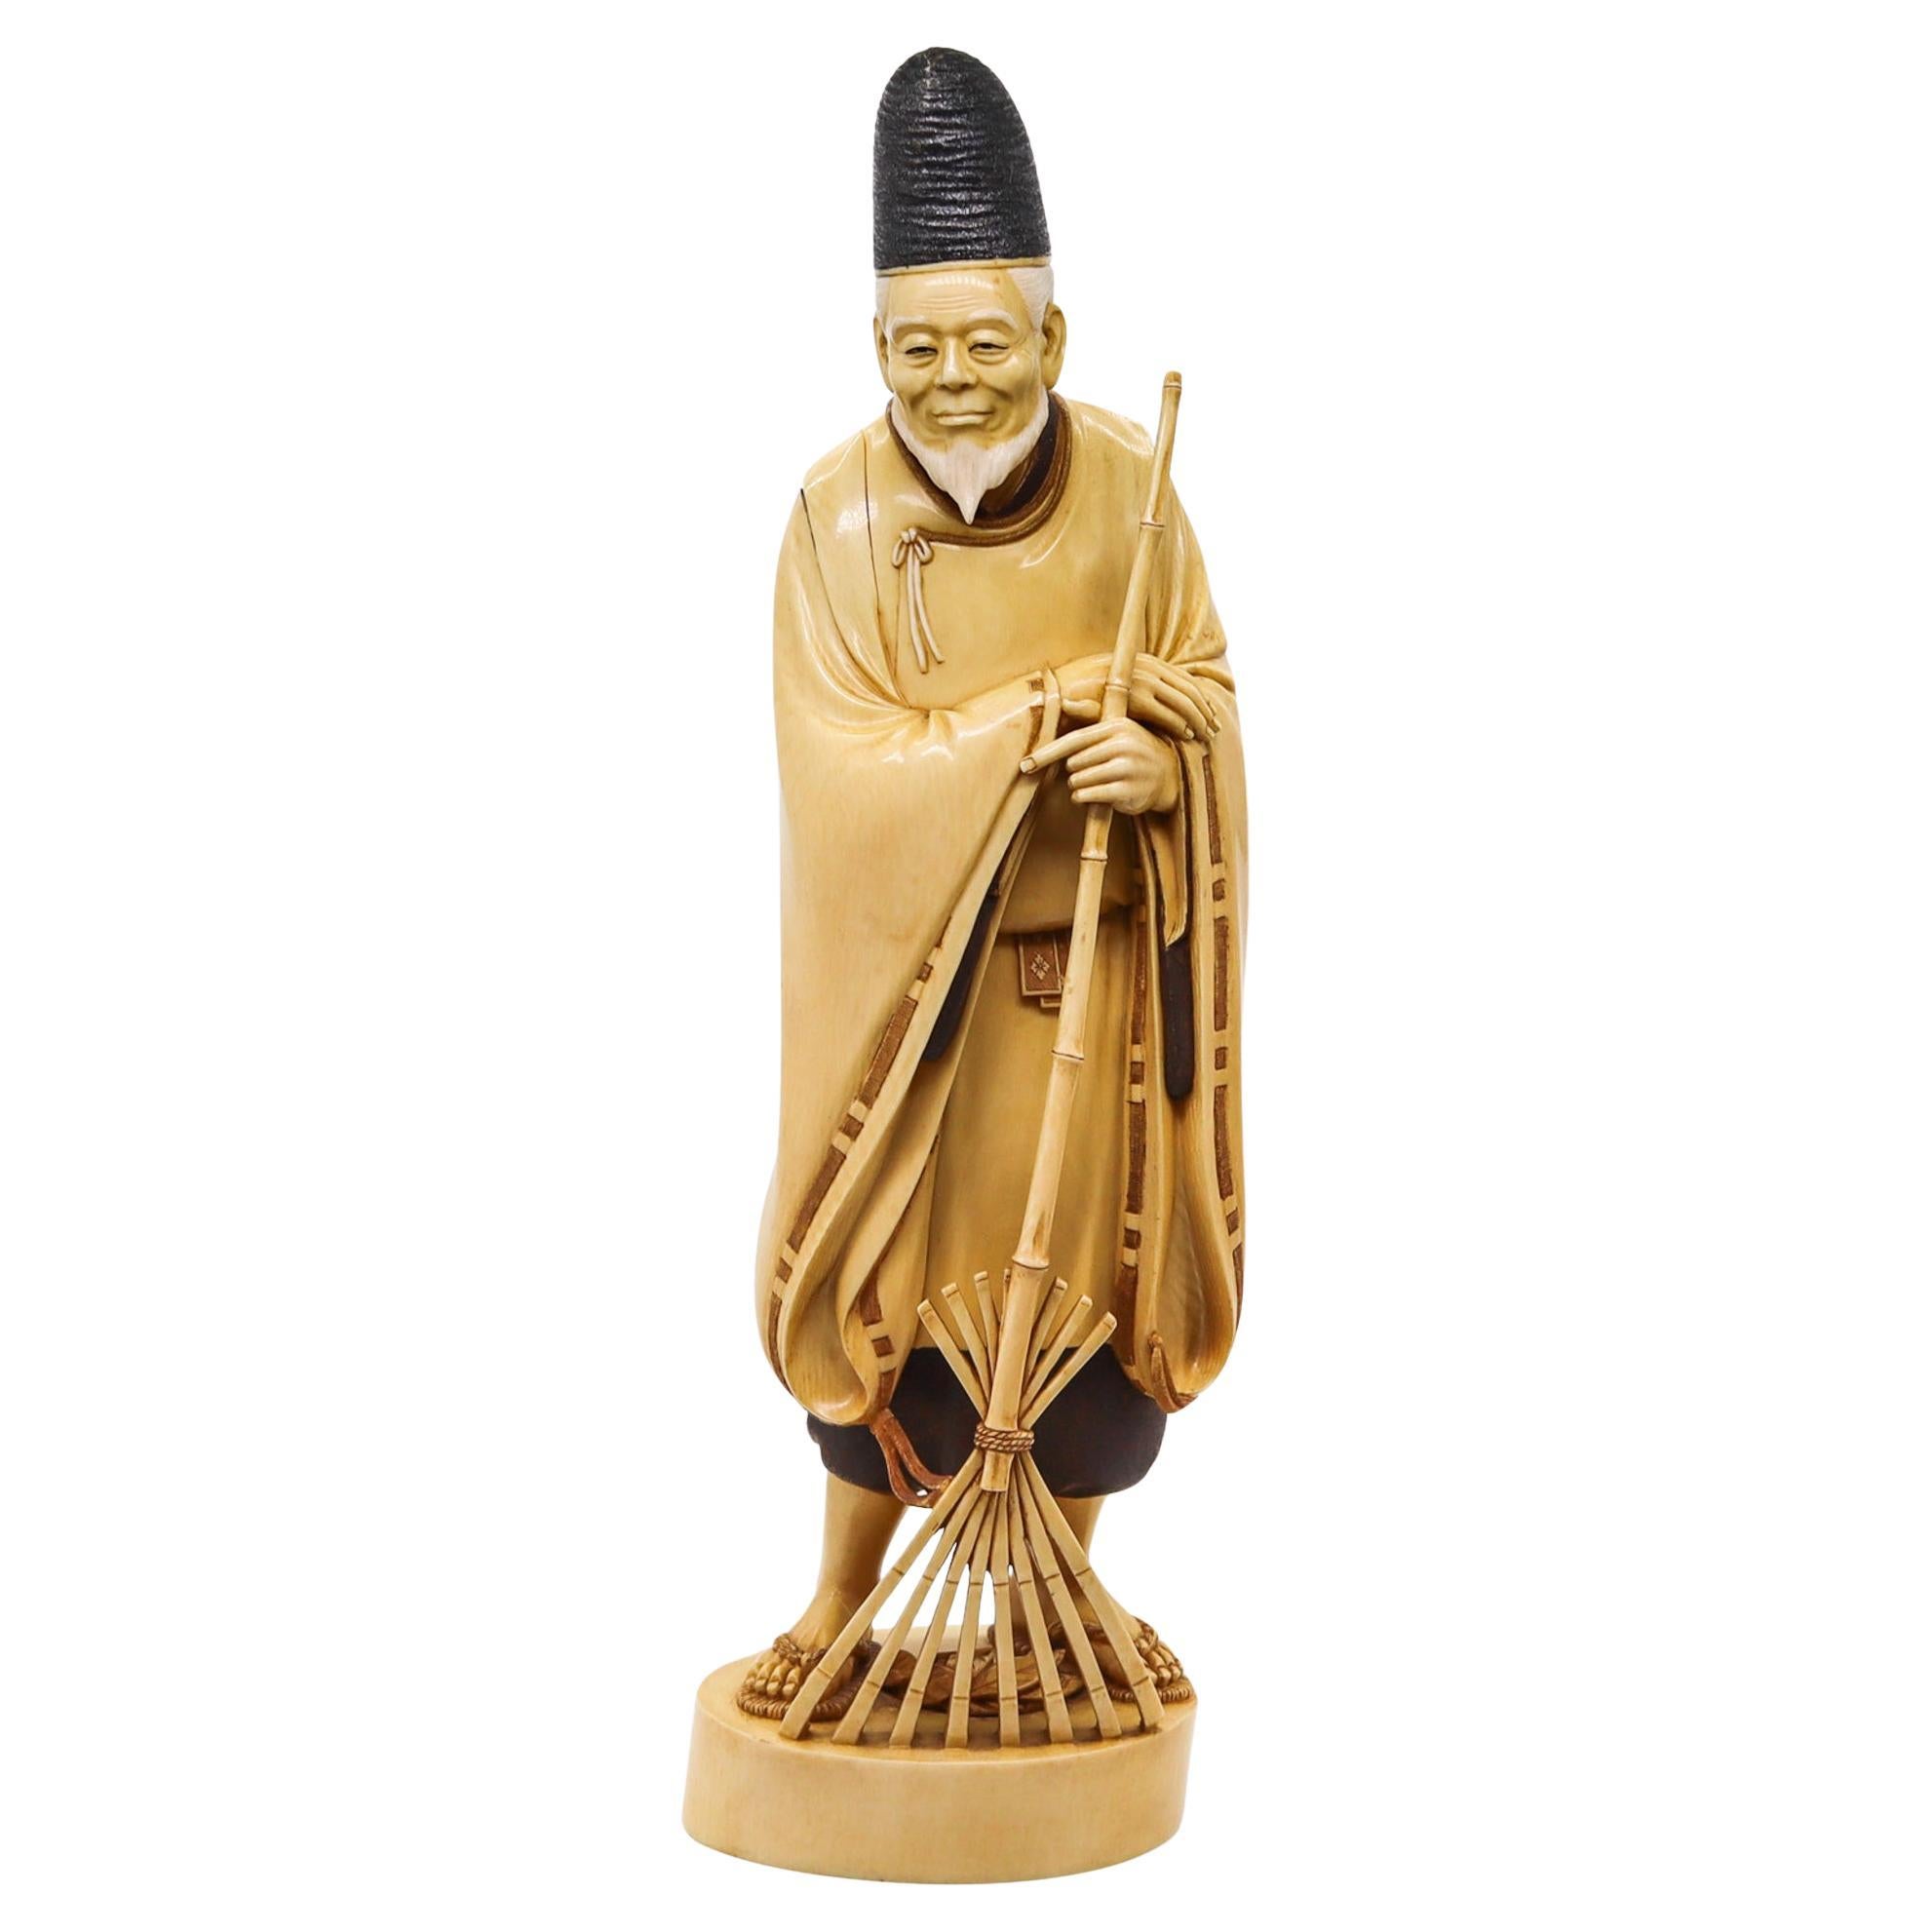 Japan 1890 Meiji Carved Sculpture of a Dressed Monk With a Rake